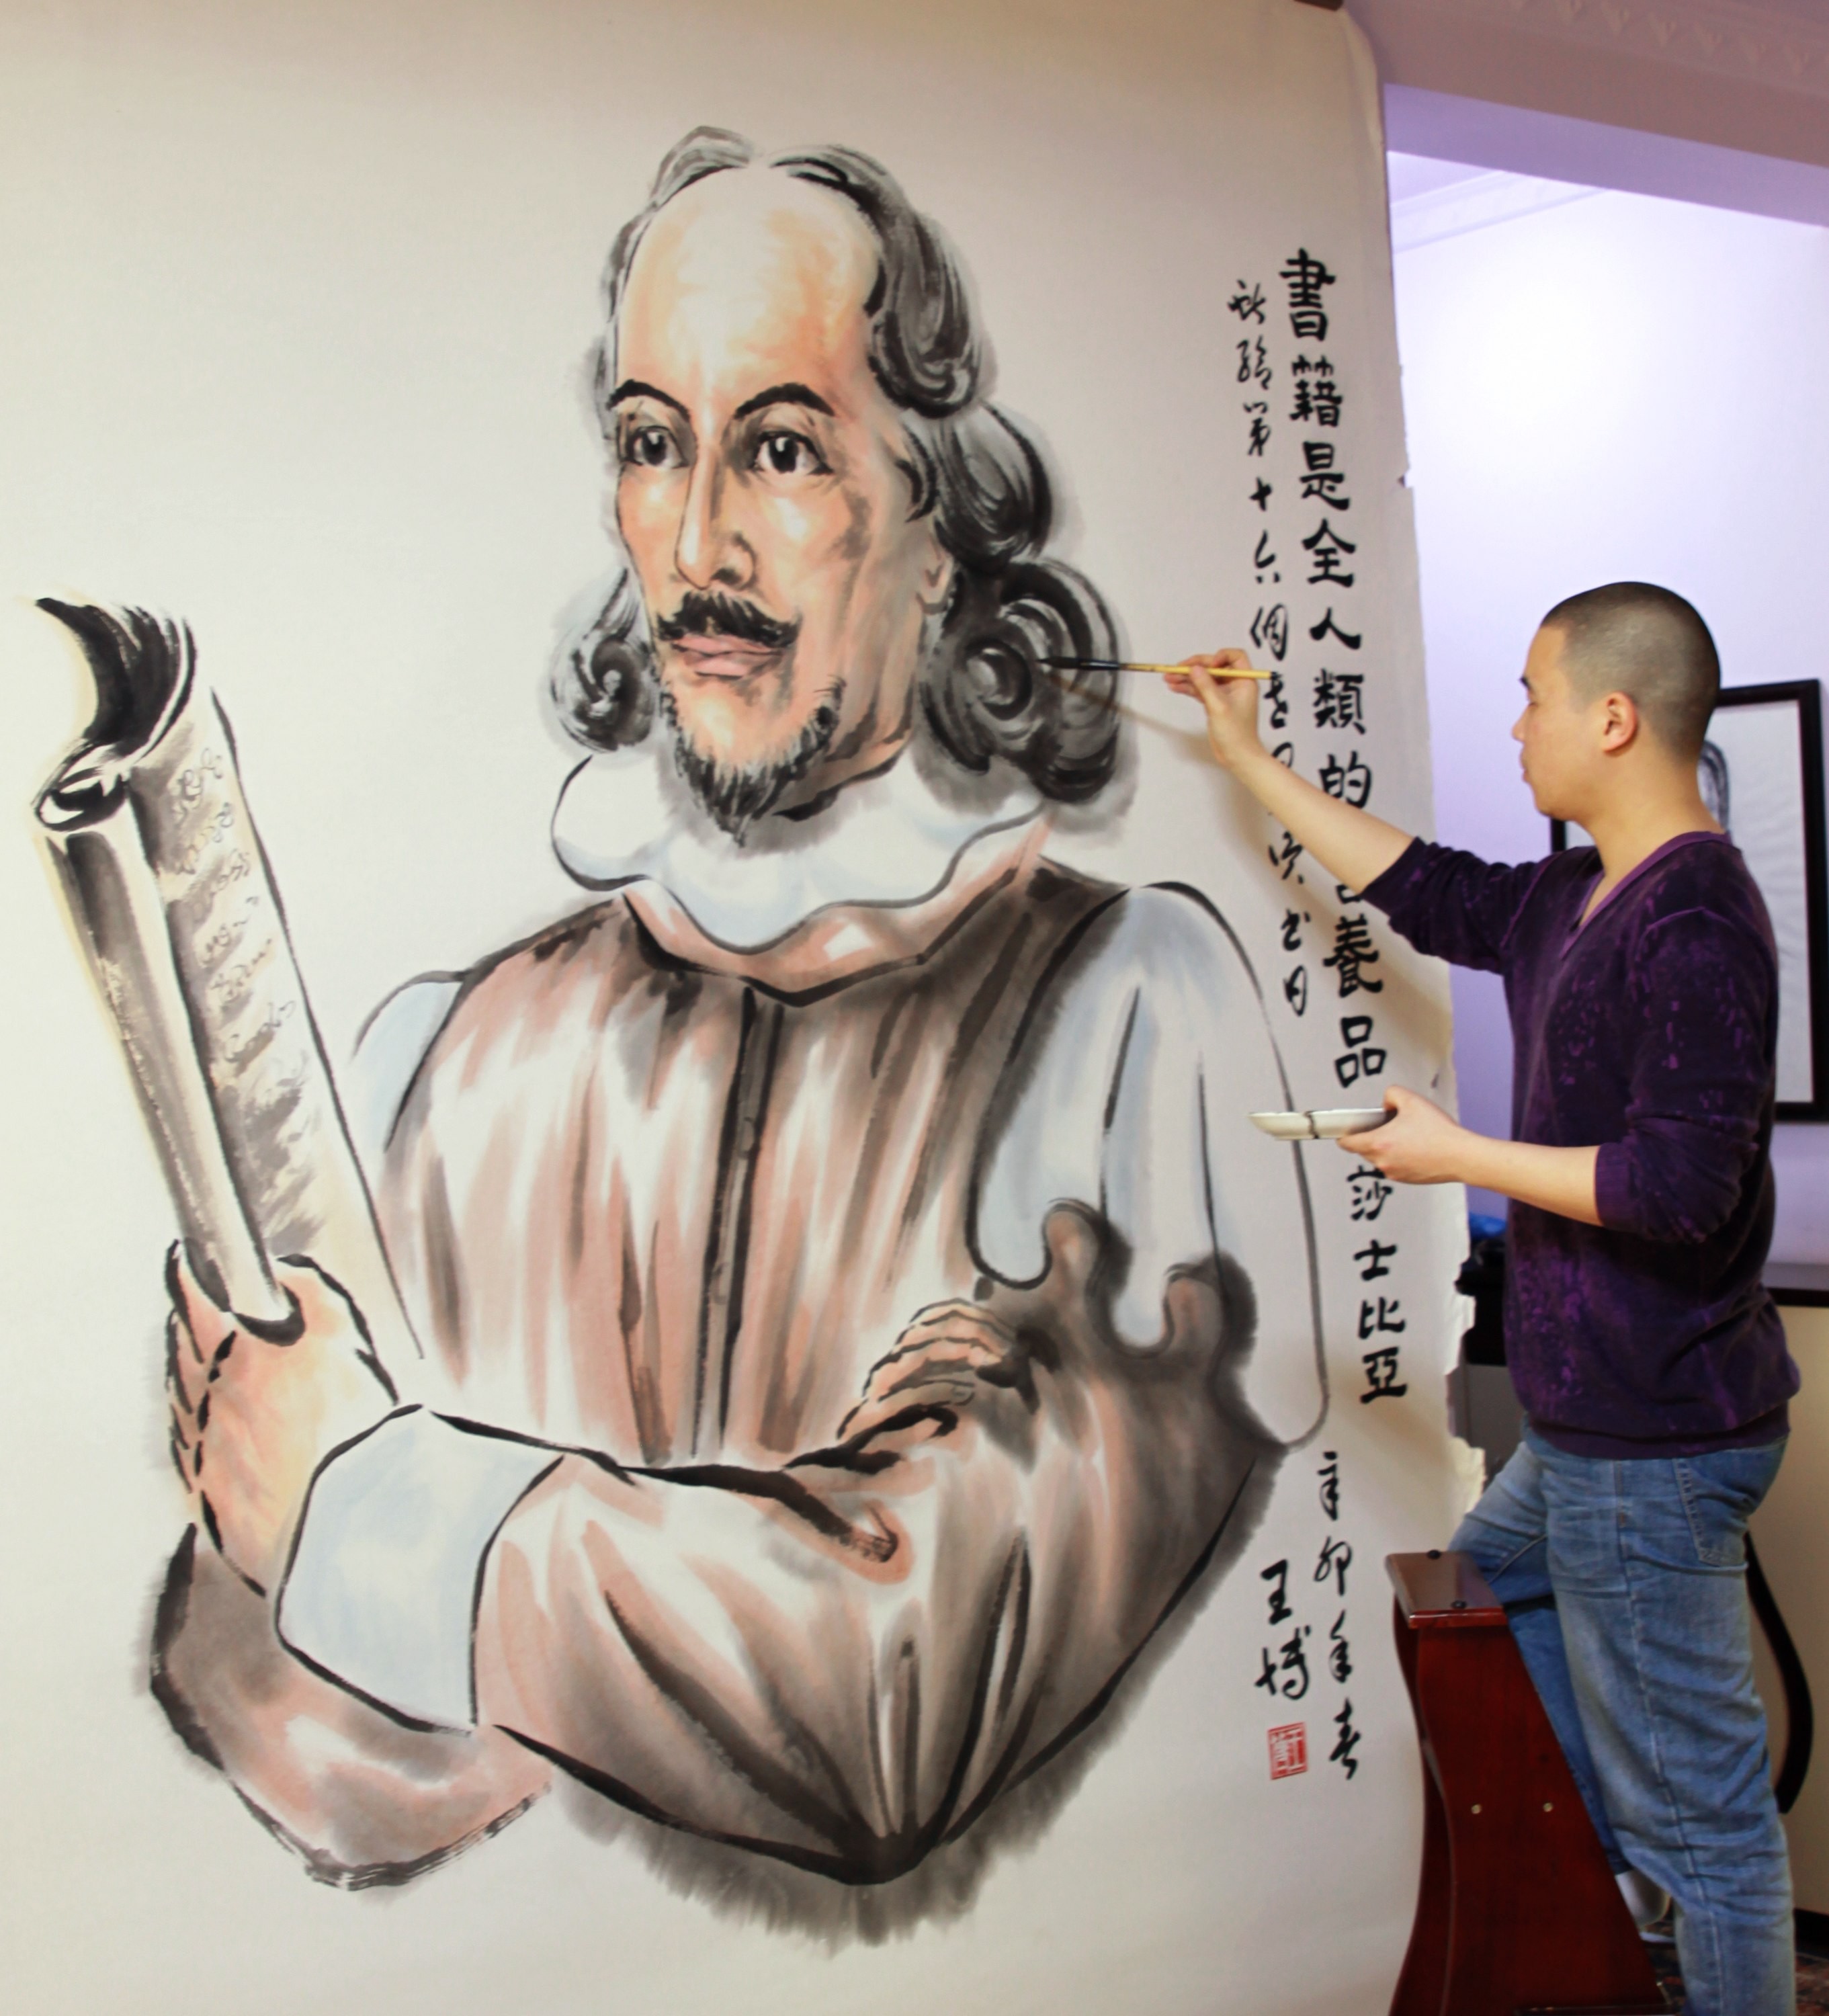 Young painter Wang Bo creates large ink portrait of Shakespeare in Meishan, Sichuan Province. /CNSPHOTO